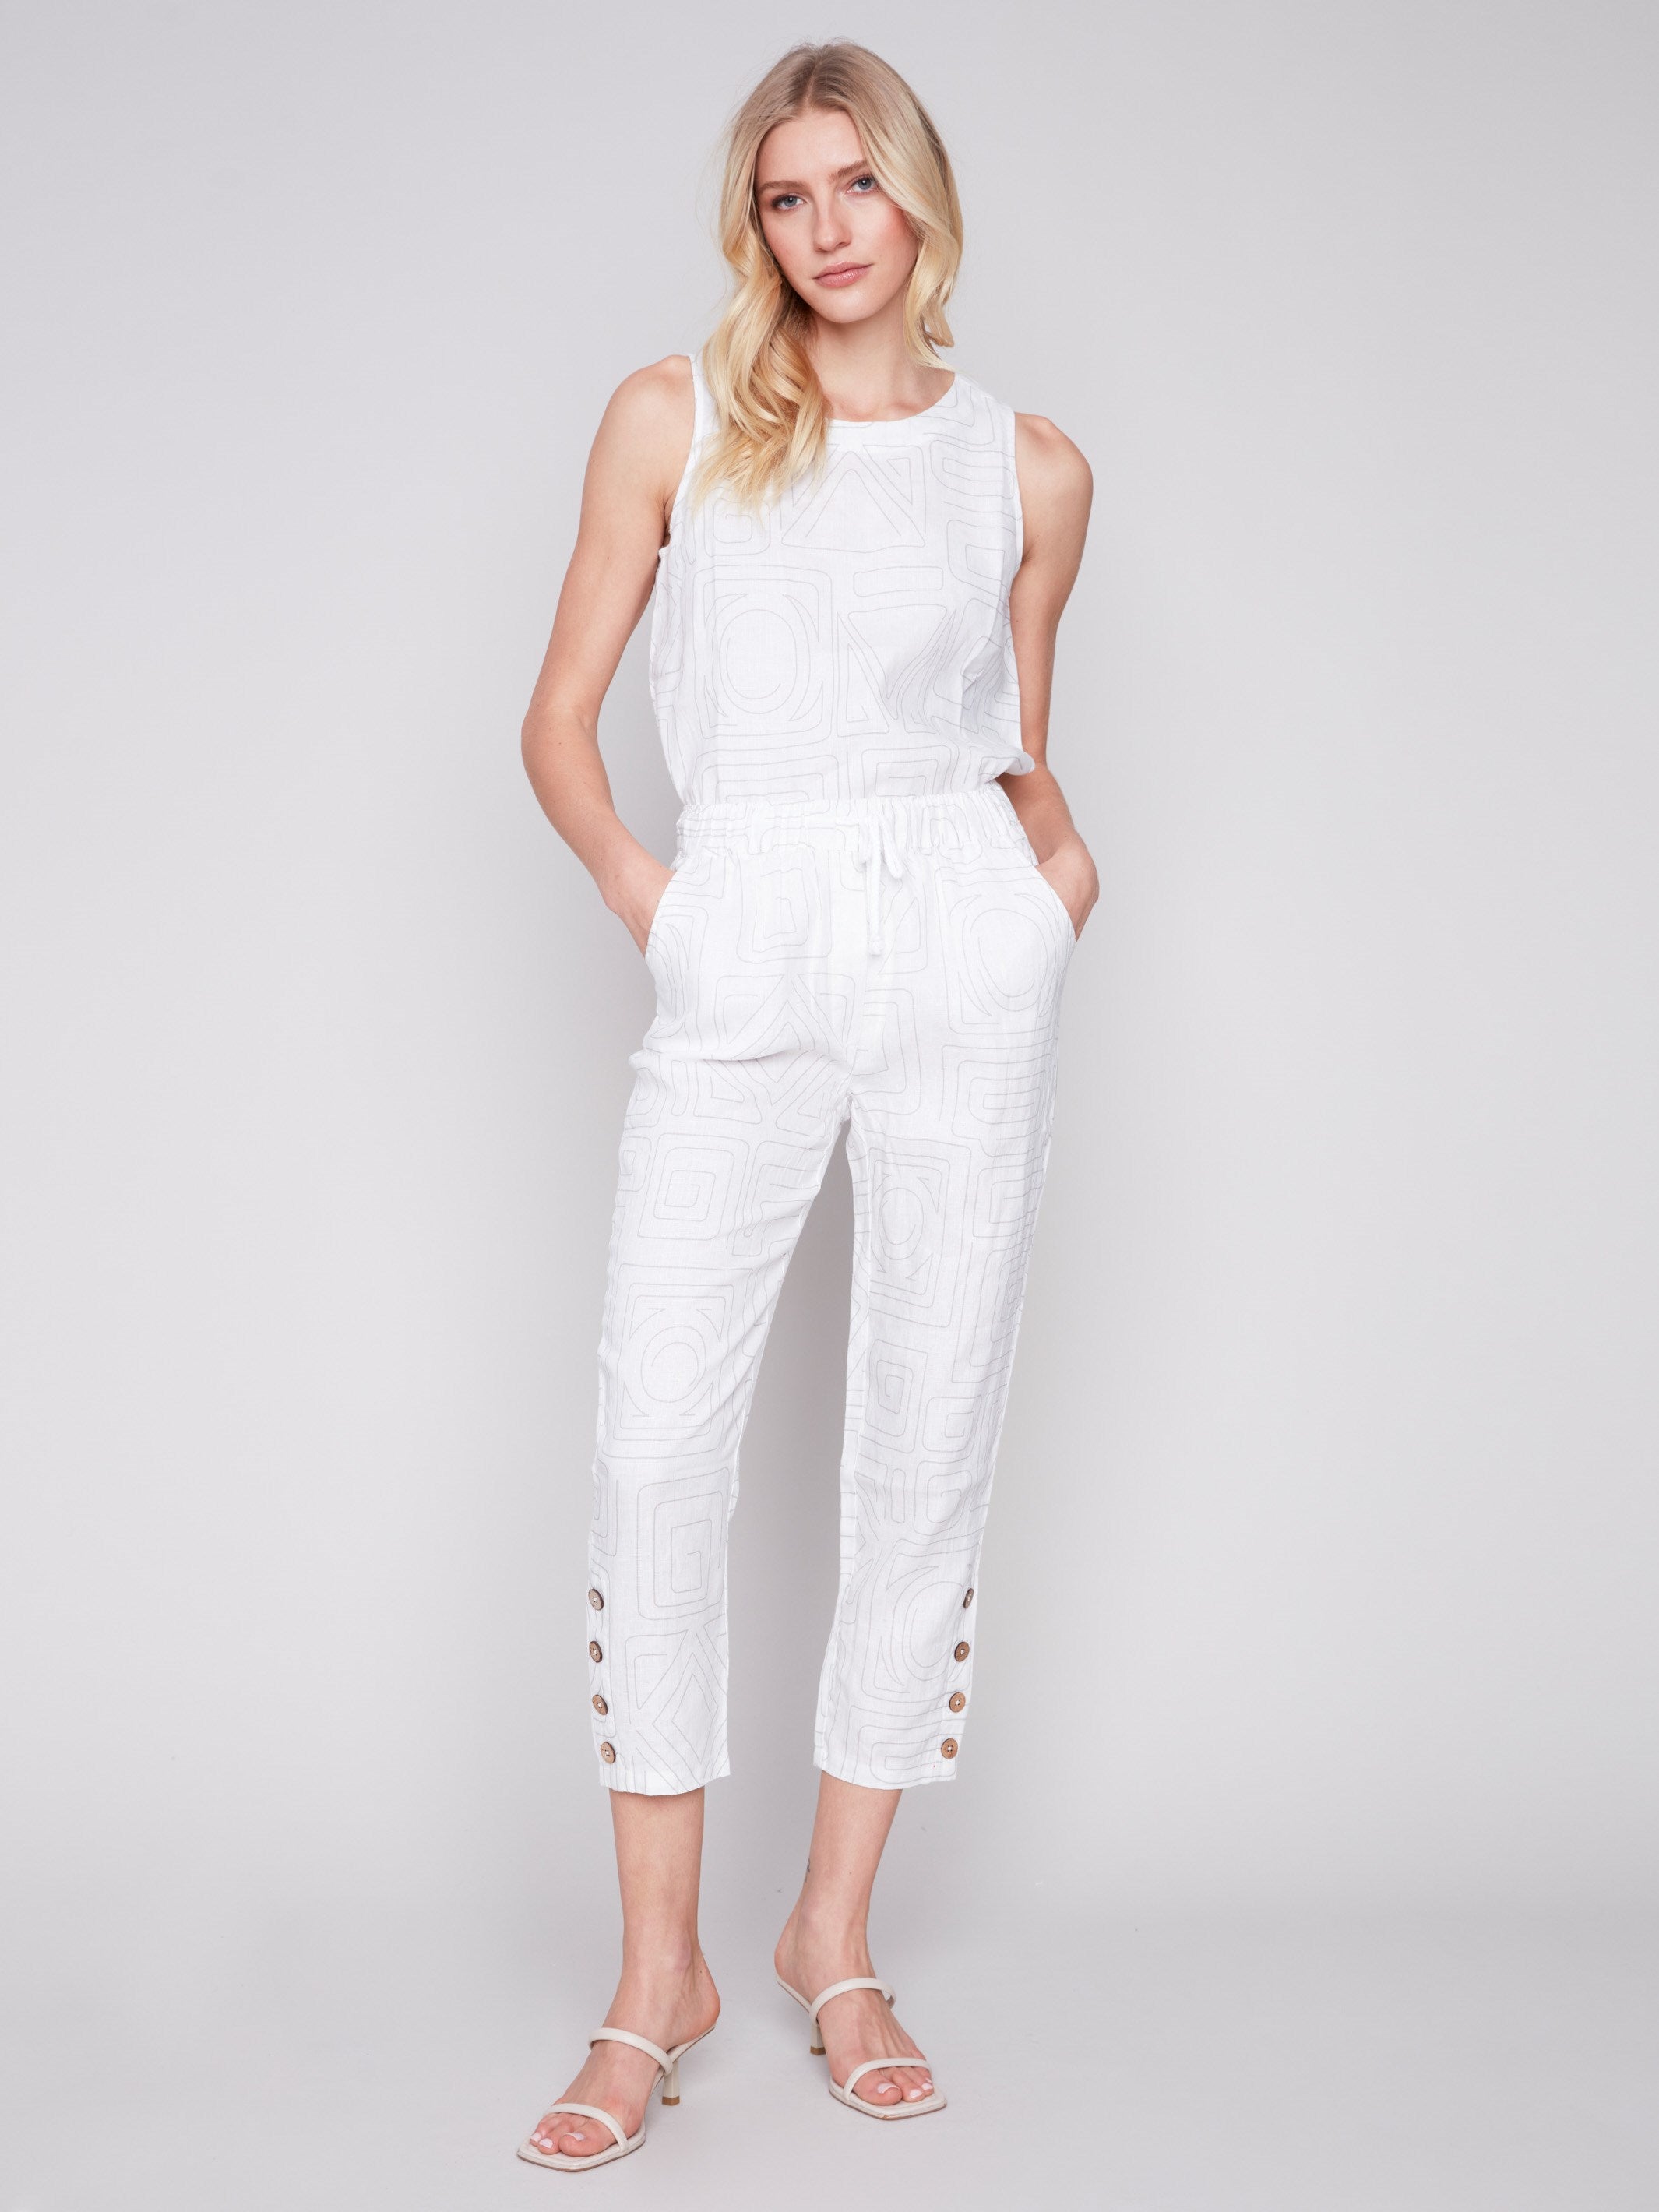 Linen Jogger Pants with Button Detail - Light Grey - Charlie B Collection Canada - Image 1